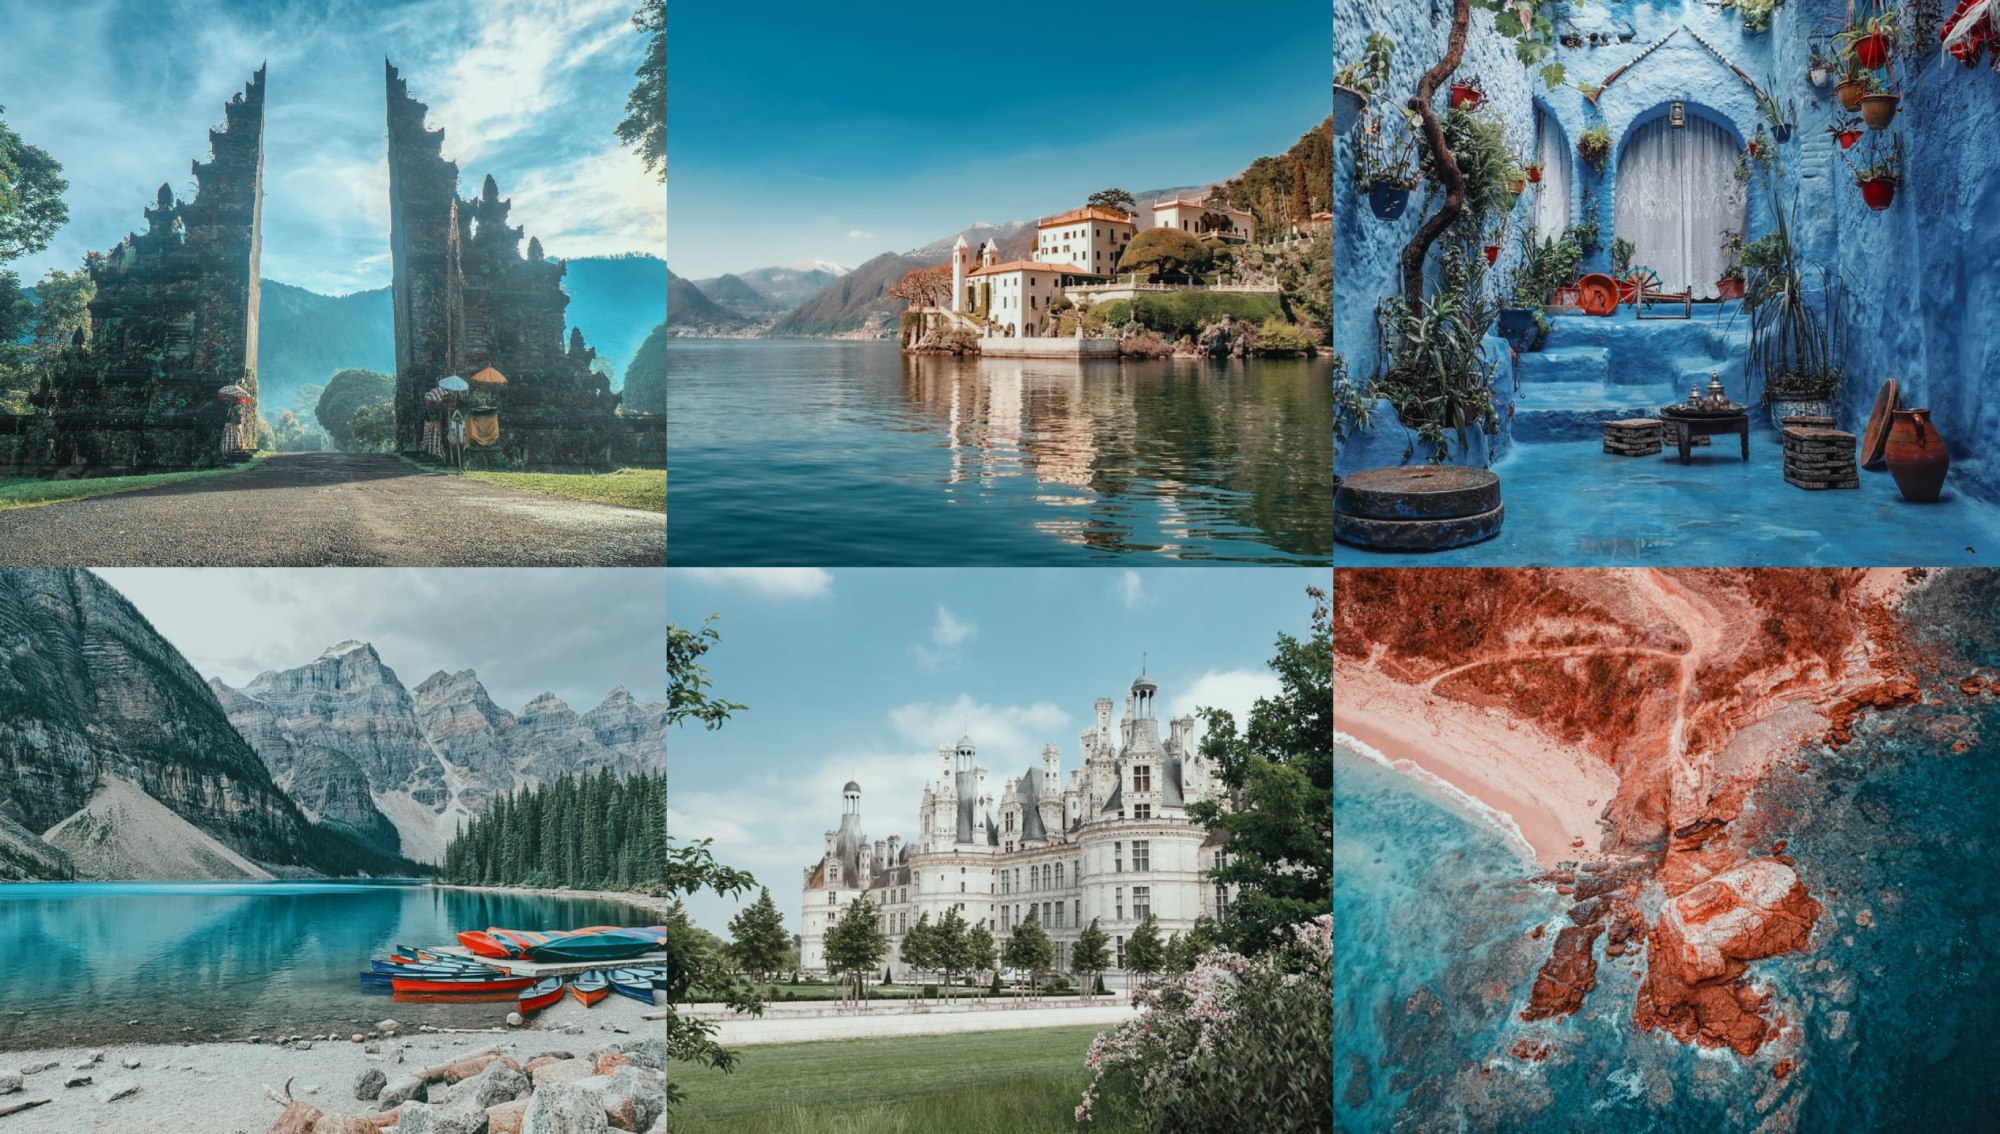 Most Instagrammable Destinations to Explore– Simplify Your Journey with Travel CRM